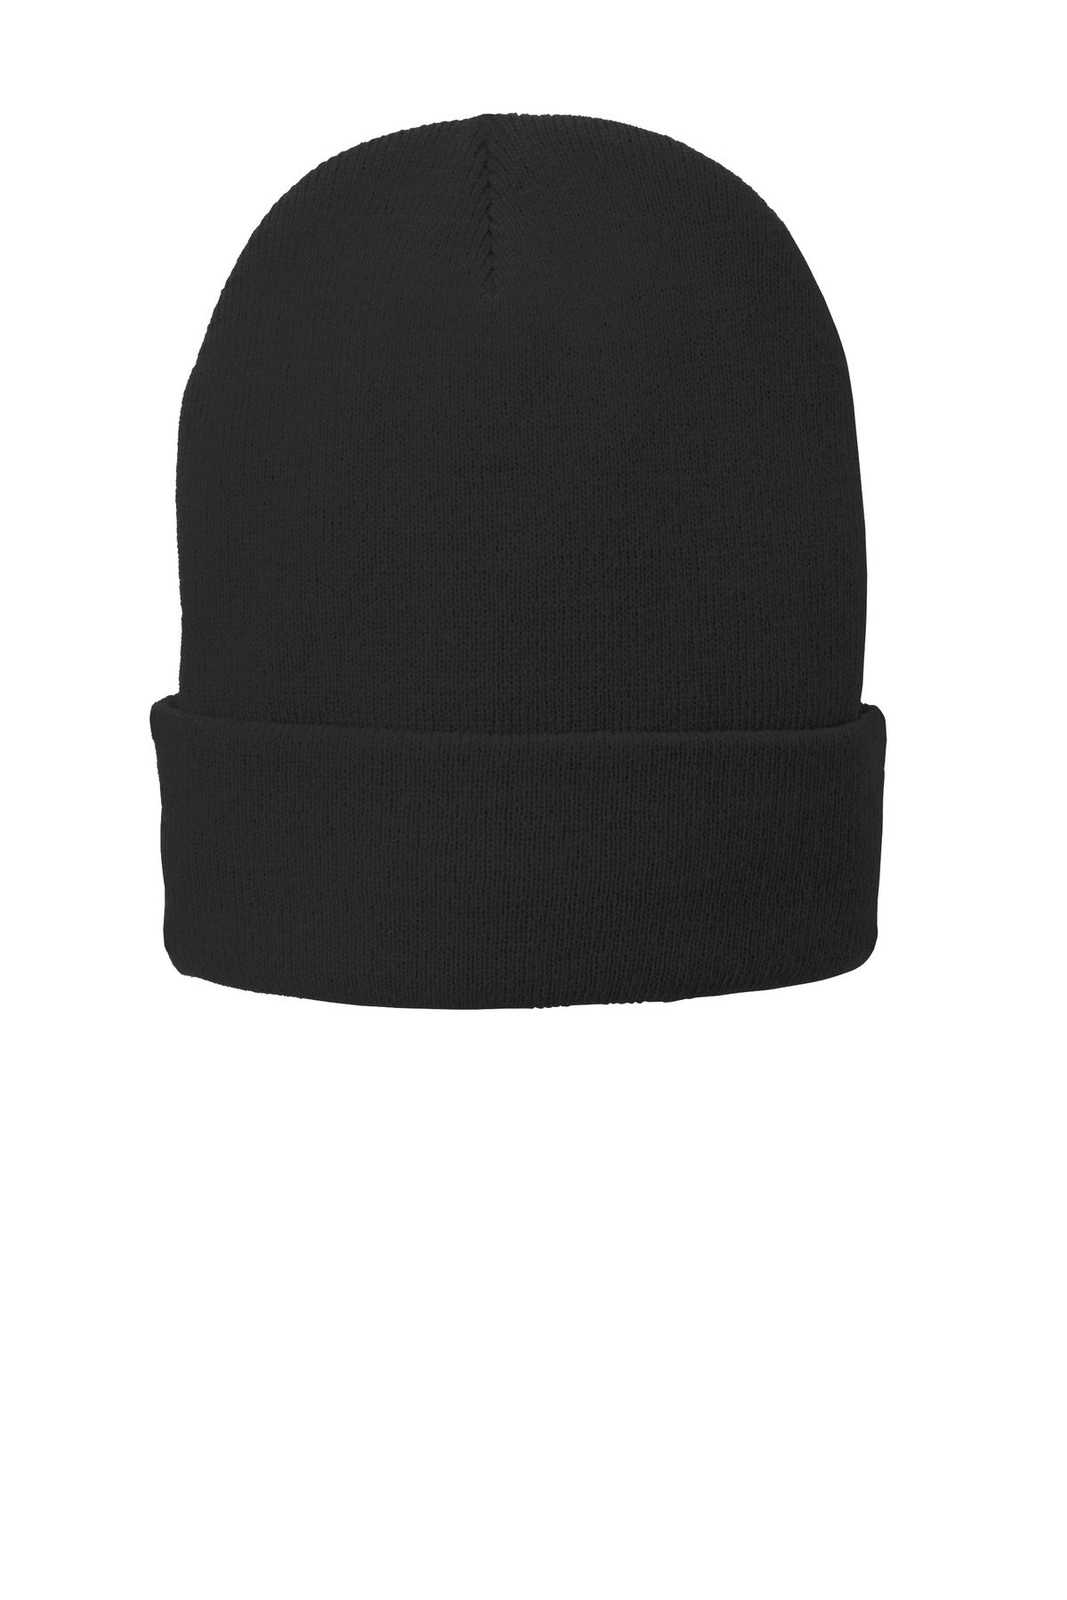 Port & Company CP90L Fleece-Lined Knit Cap with Cuff - Black - HIT a Double - 1